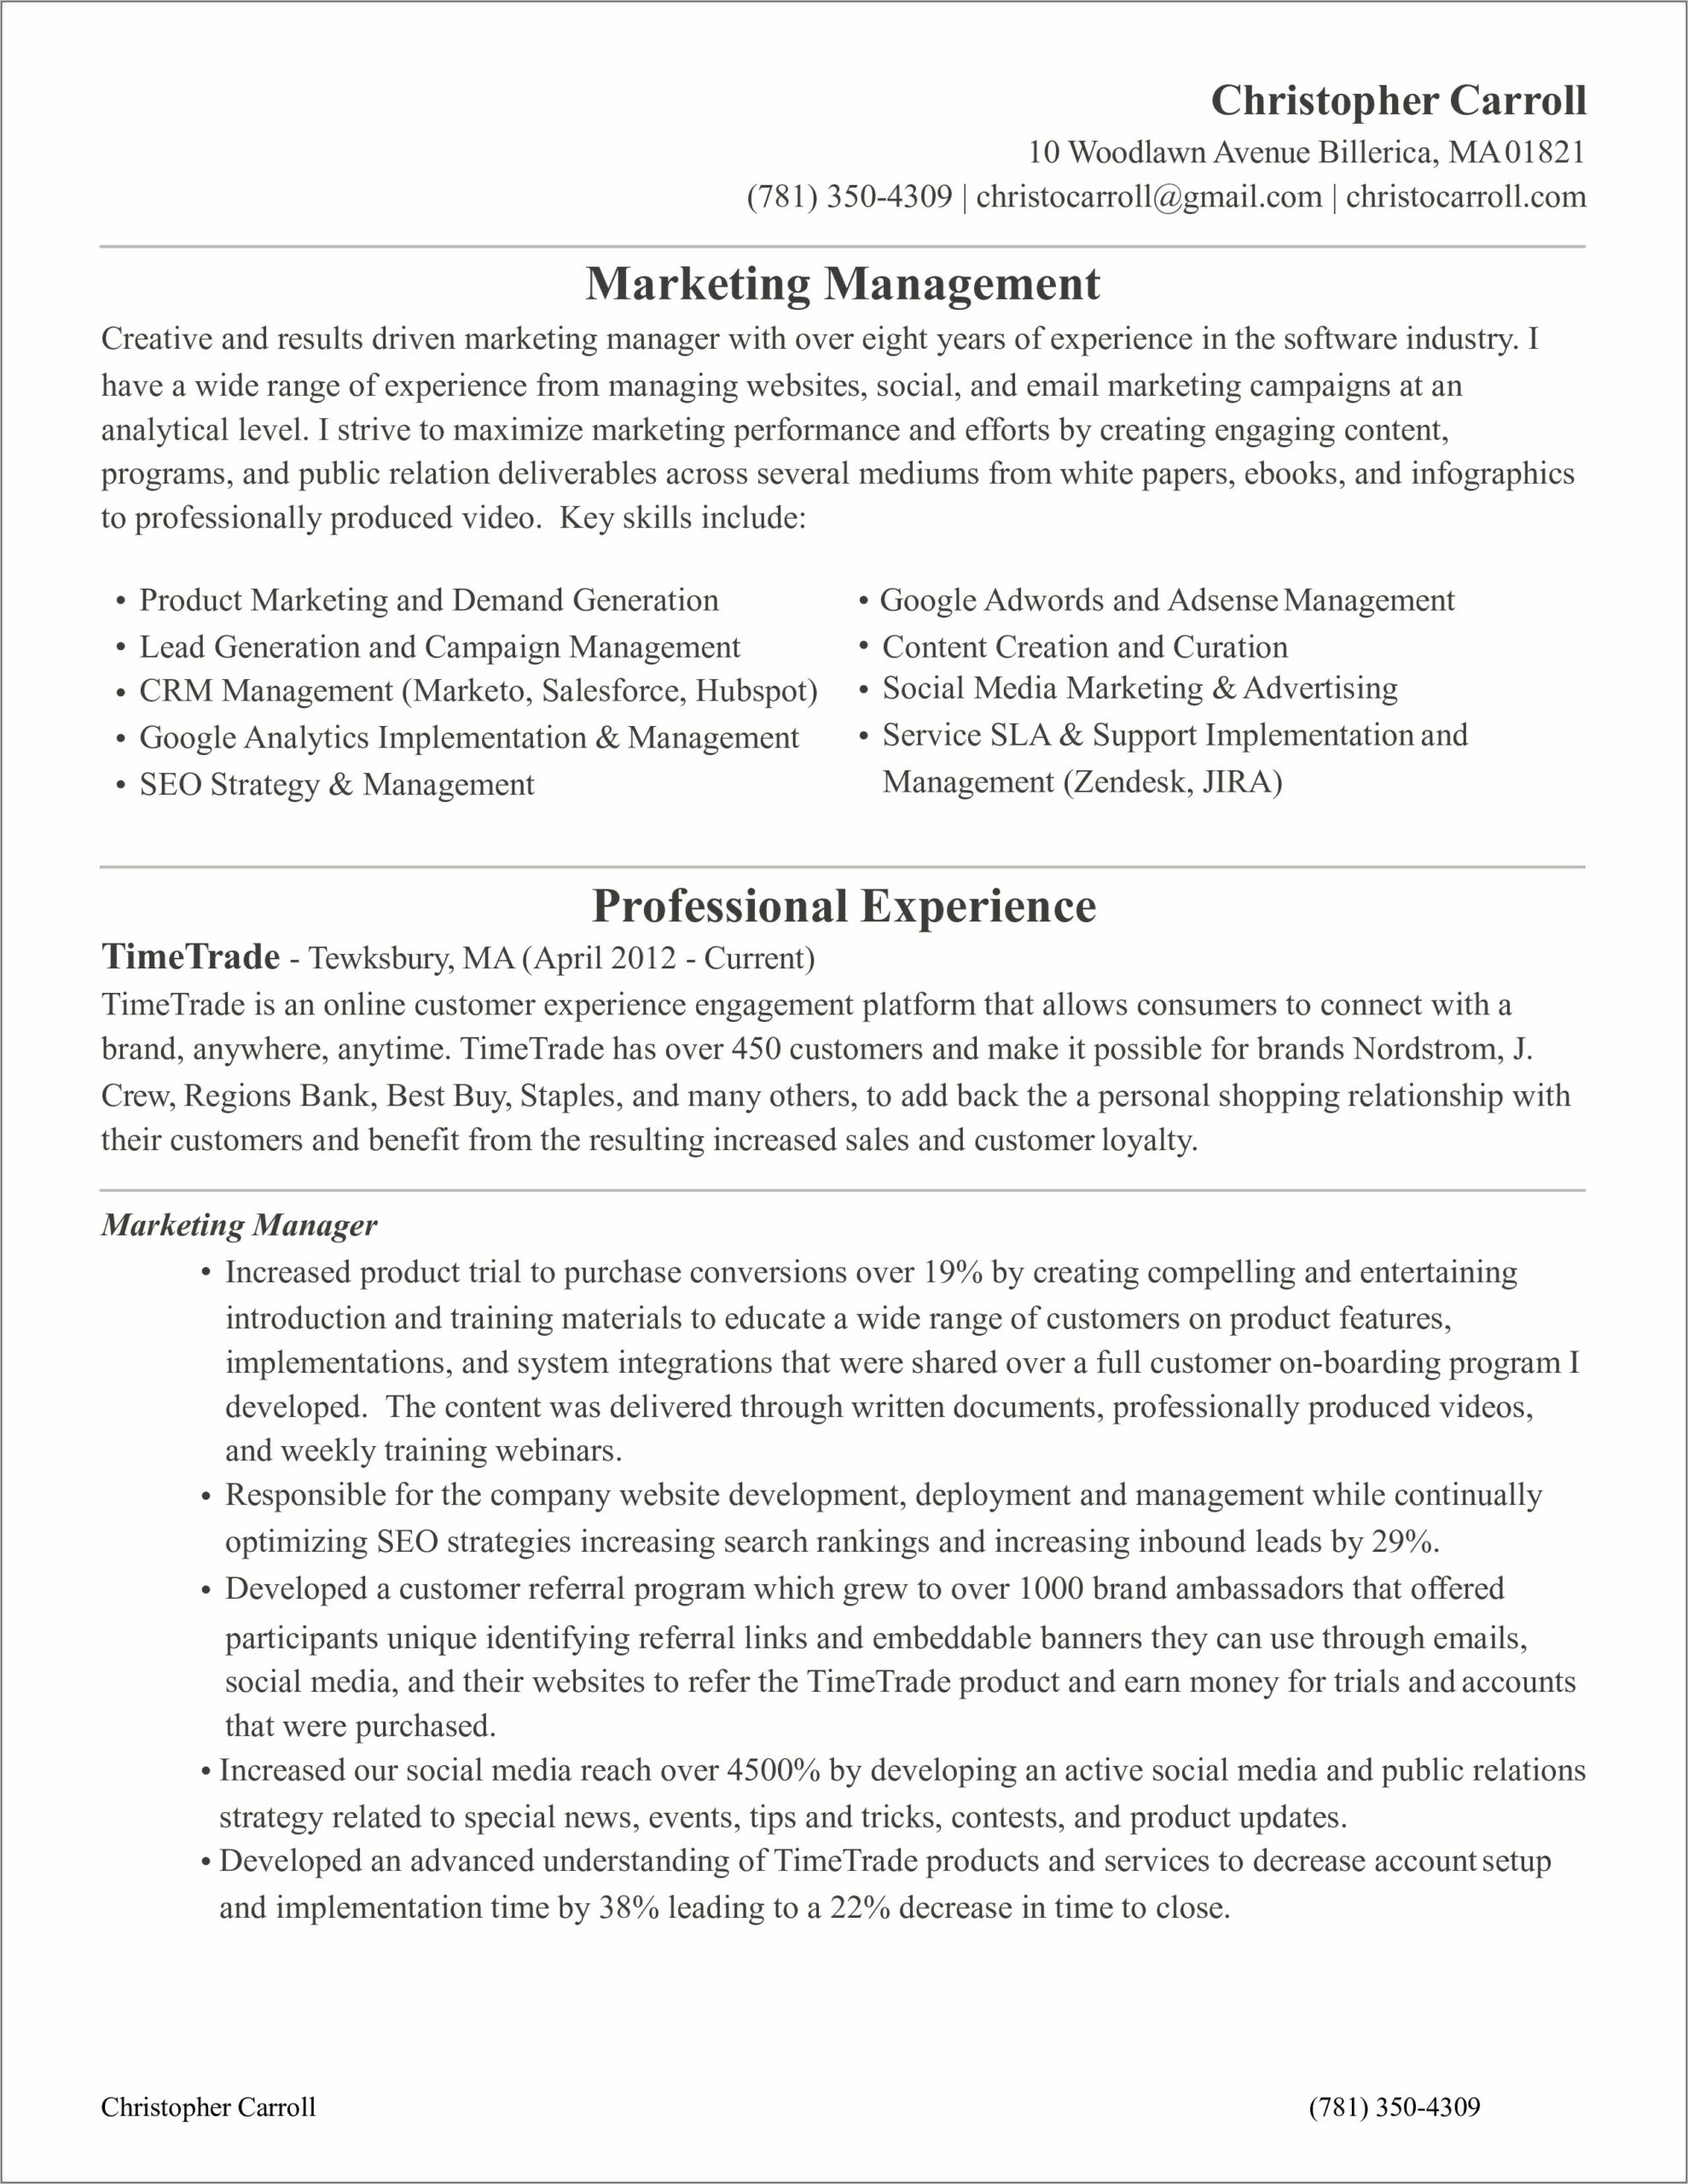 Sprint Product Marketing Manager Resume